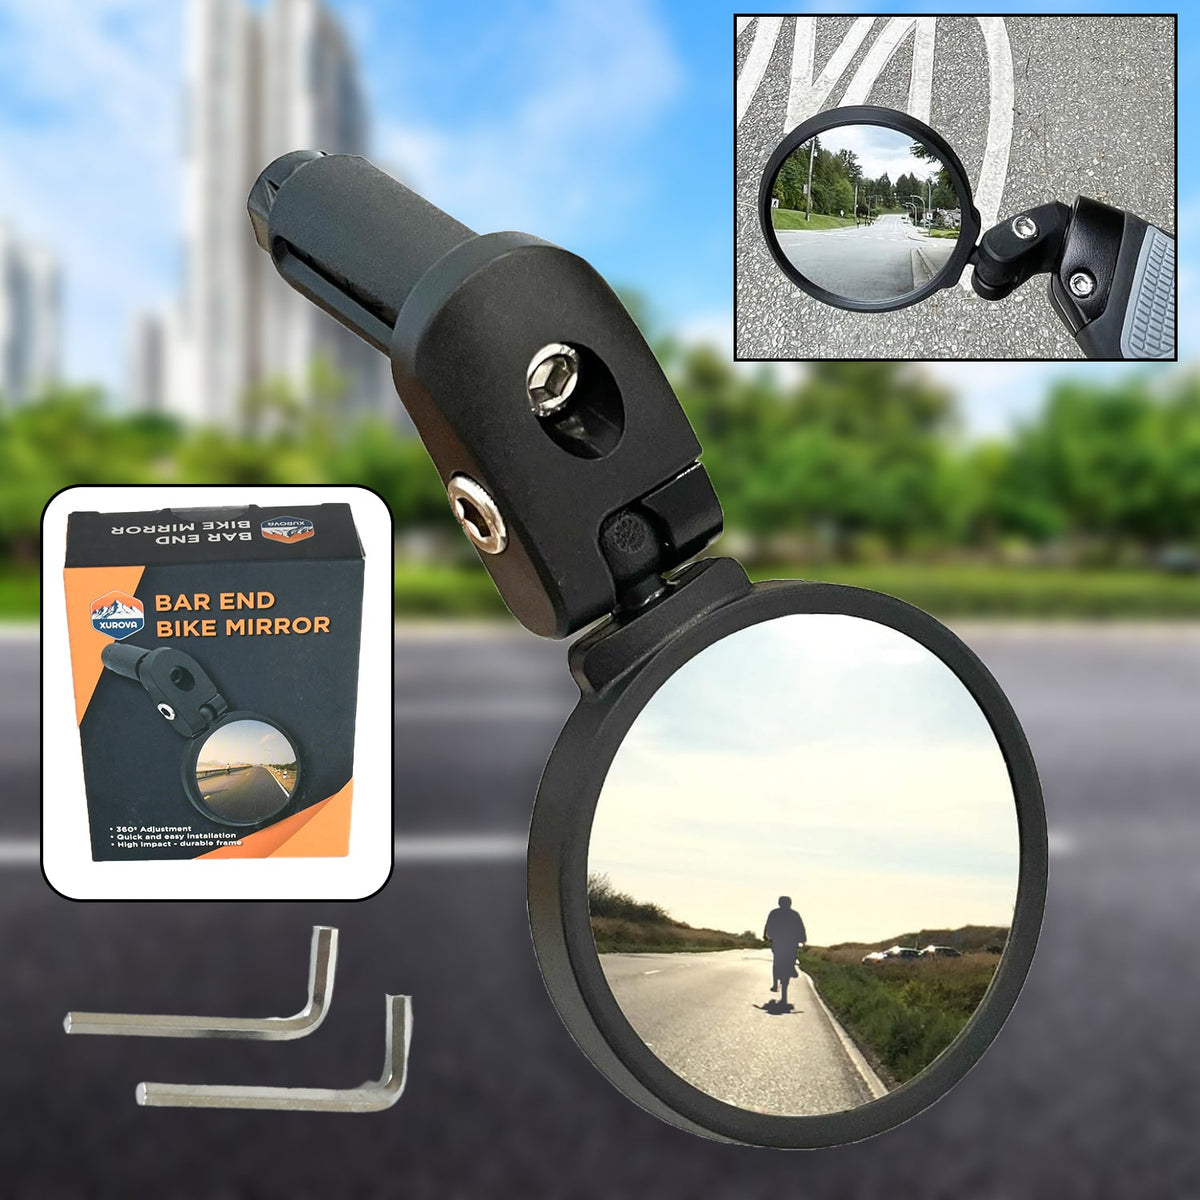 8505 Bar End Bike Mirror, Safe Rearview Mirror 360° Rotatable & Foldable Safety Bicycle Rear View Mirror, Mirror Durable Bike Mirror (1 Pc)